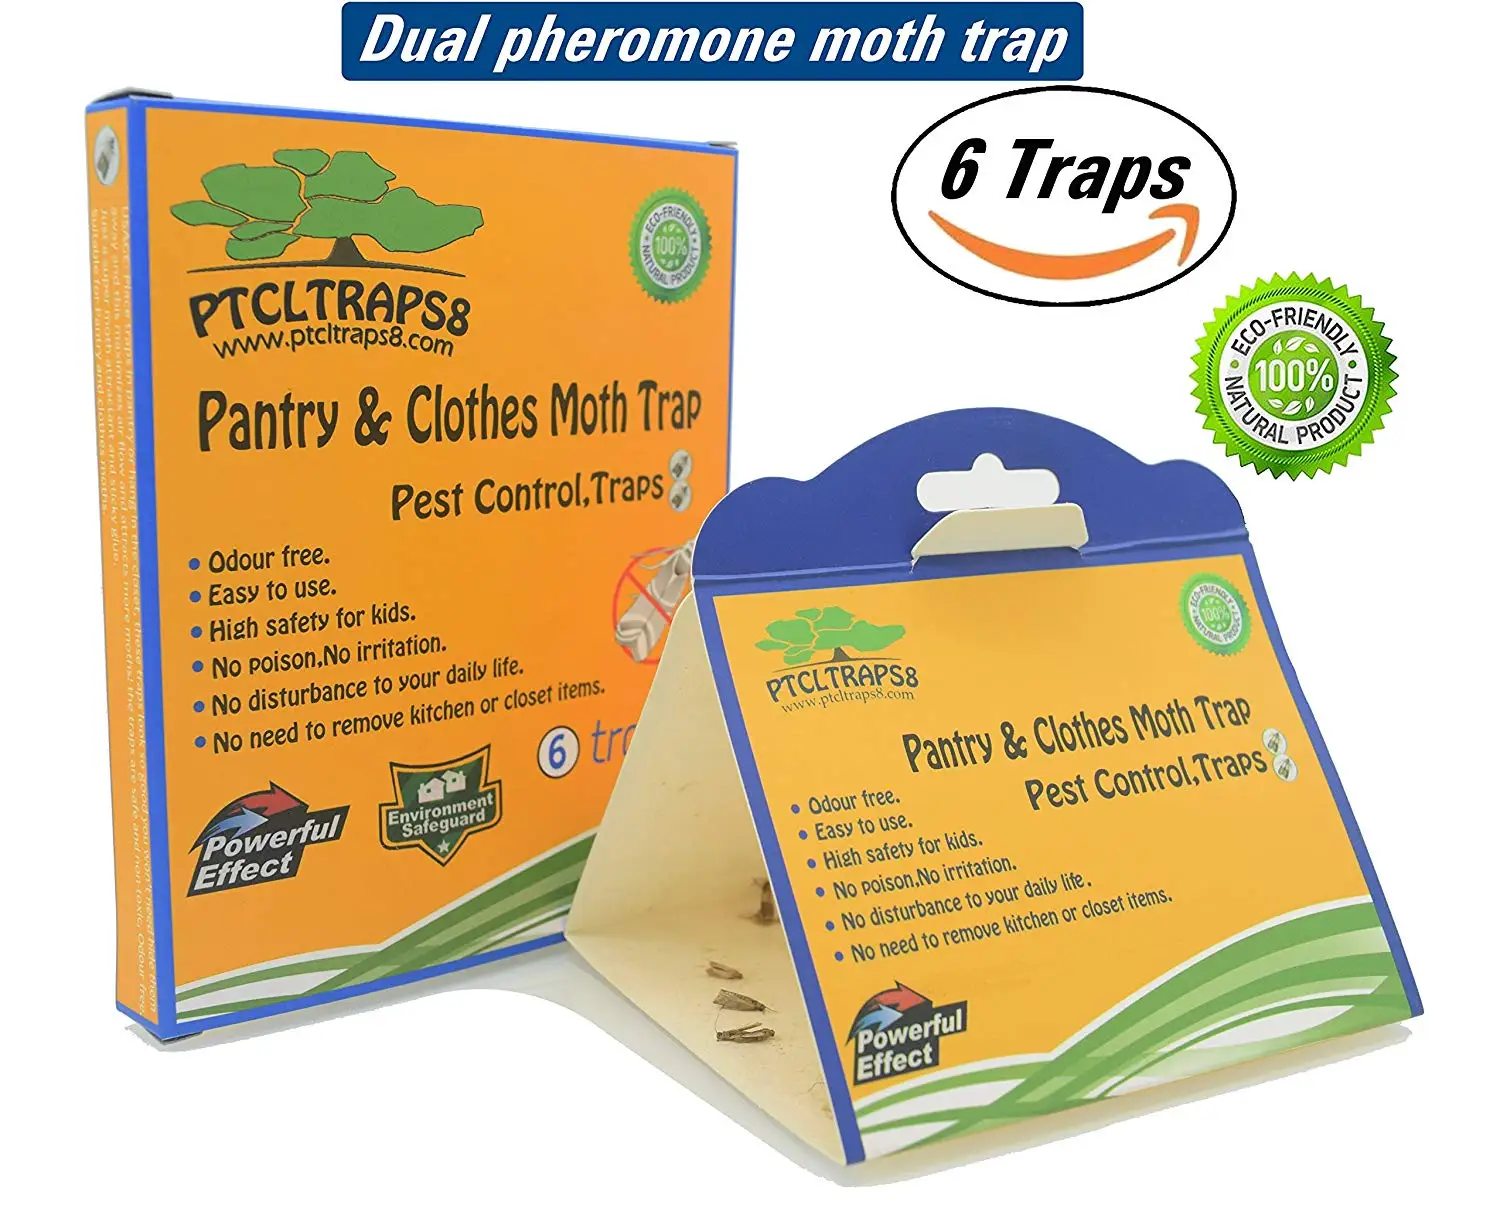 Natural and Effective Treatment against Moths 3 Months of Treatment per Moth Box Refill VALUE PACK 4 Twin Packs Demi-Diamond Moth Trap Refills 